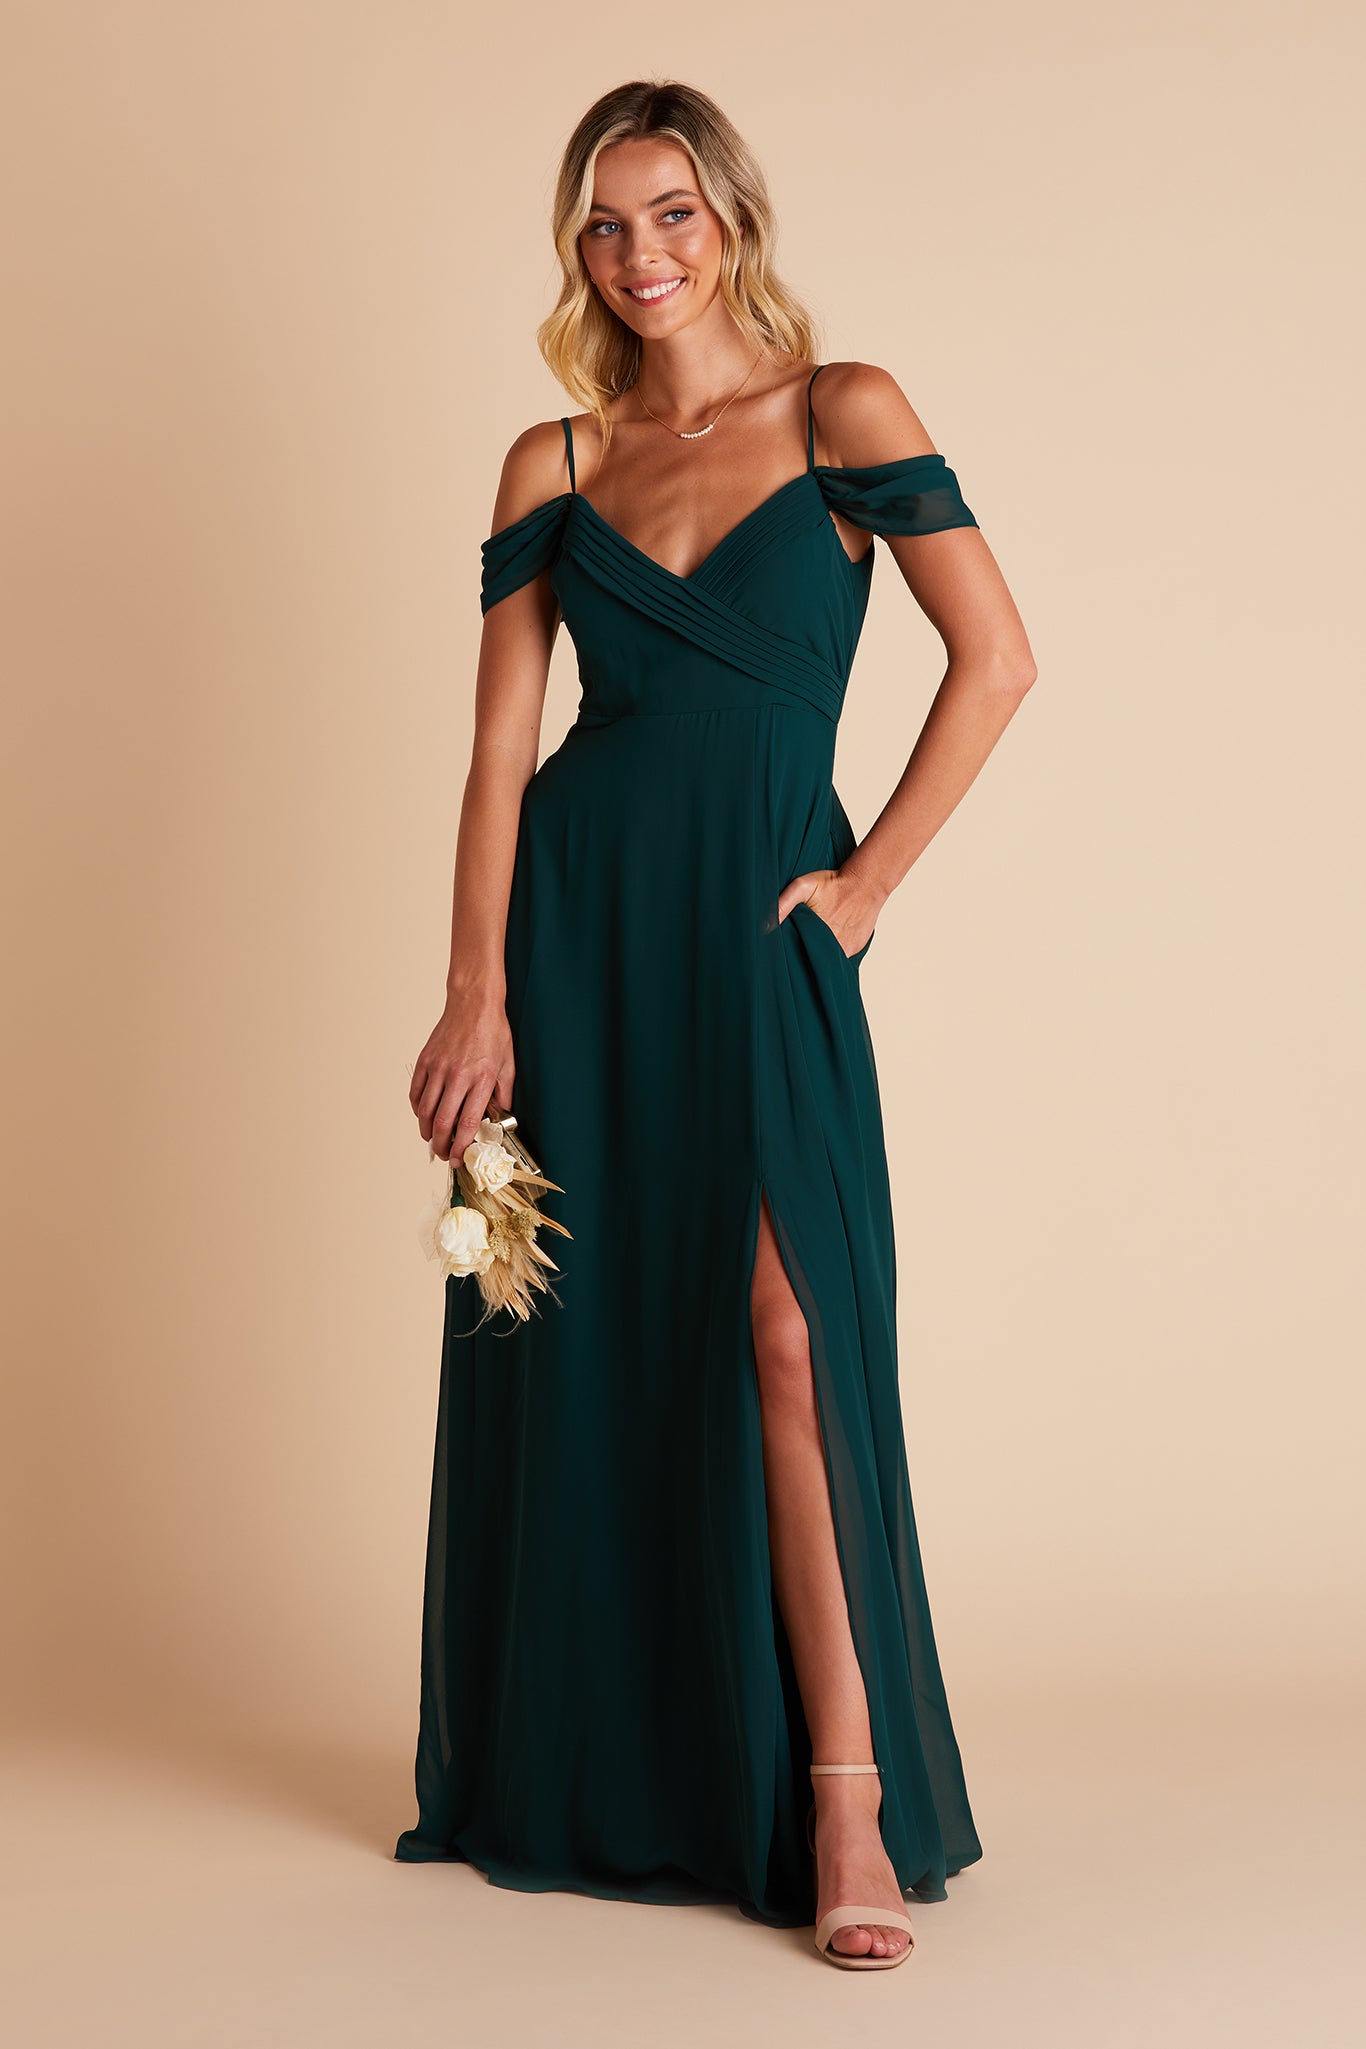 Spence convertible bridesmaid dress in emerald green chiffon by Birdy Grey, front view